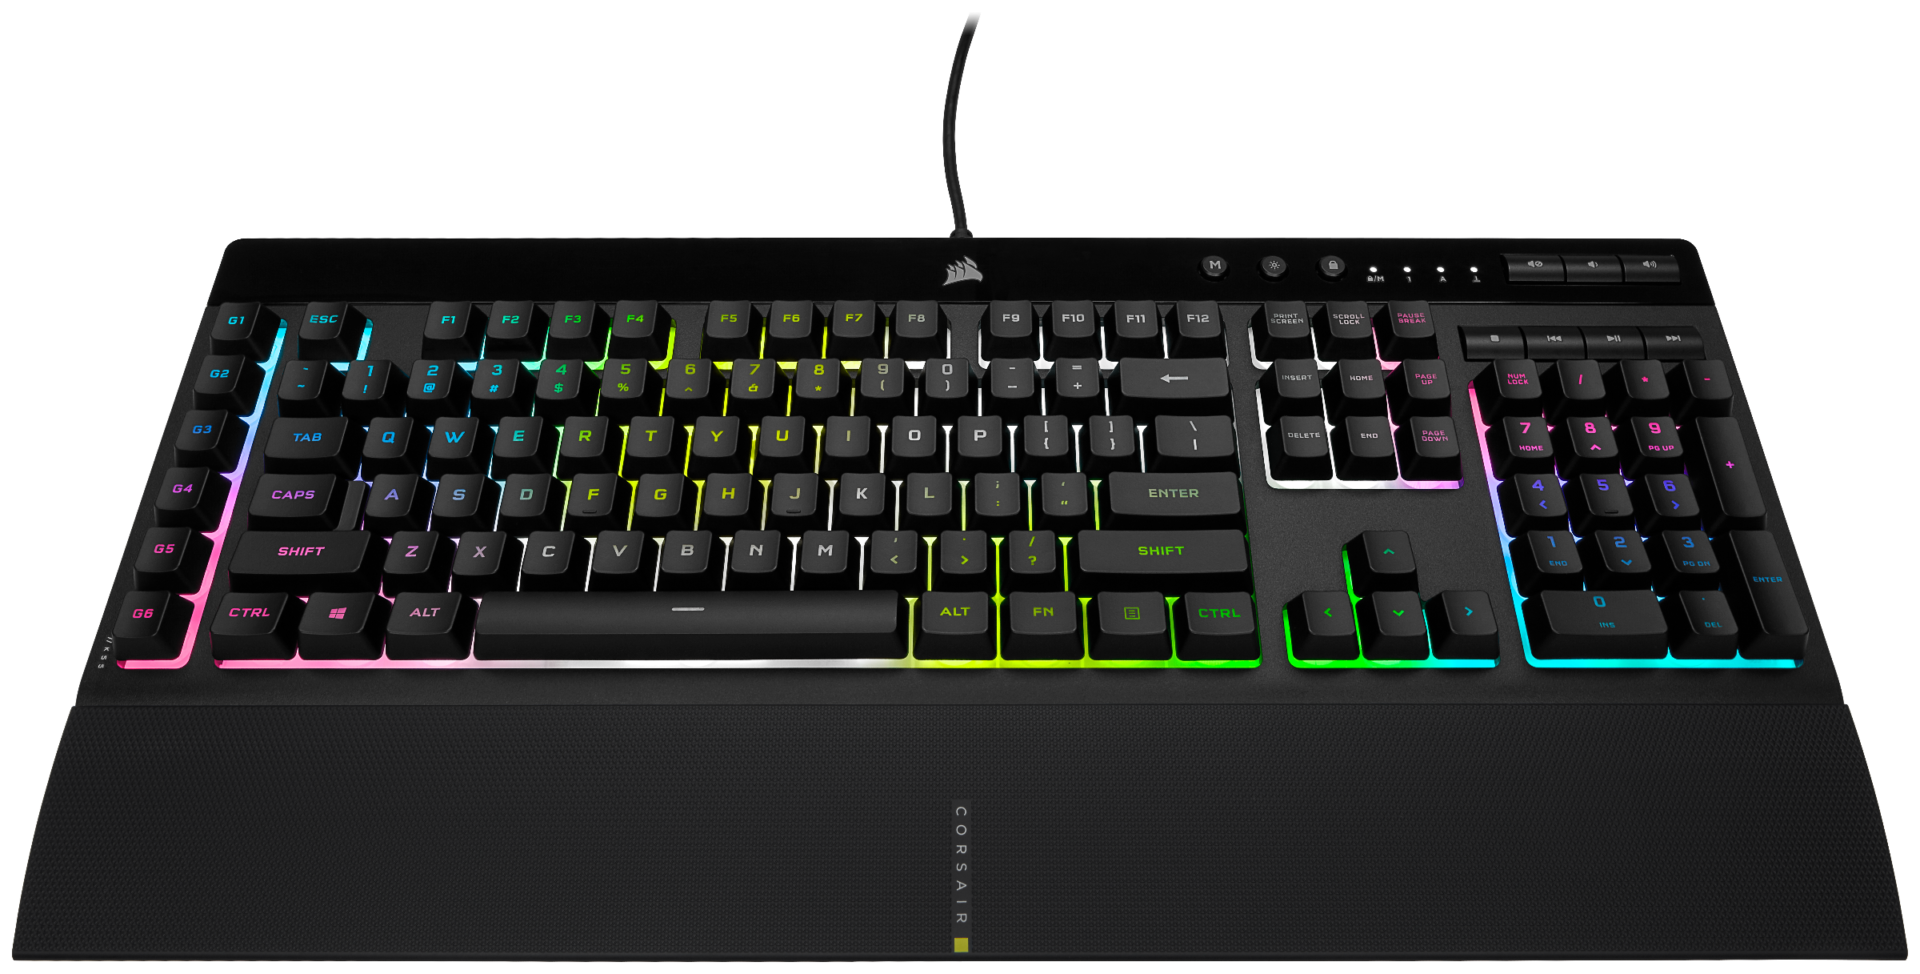 K55 RGB Pro XT gaming keyboard review: A typist's dream